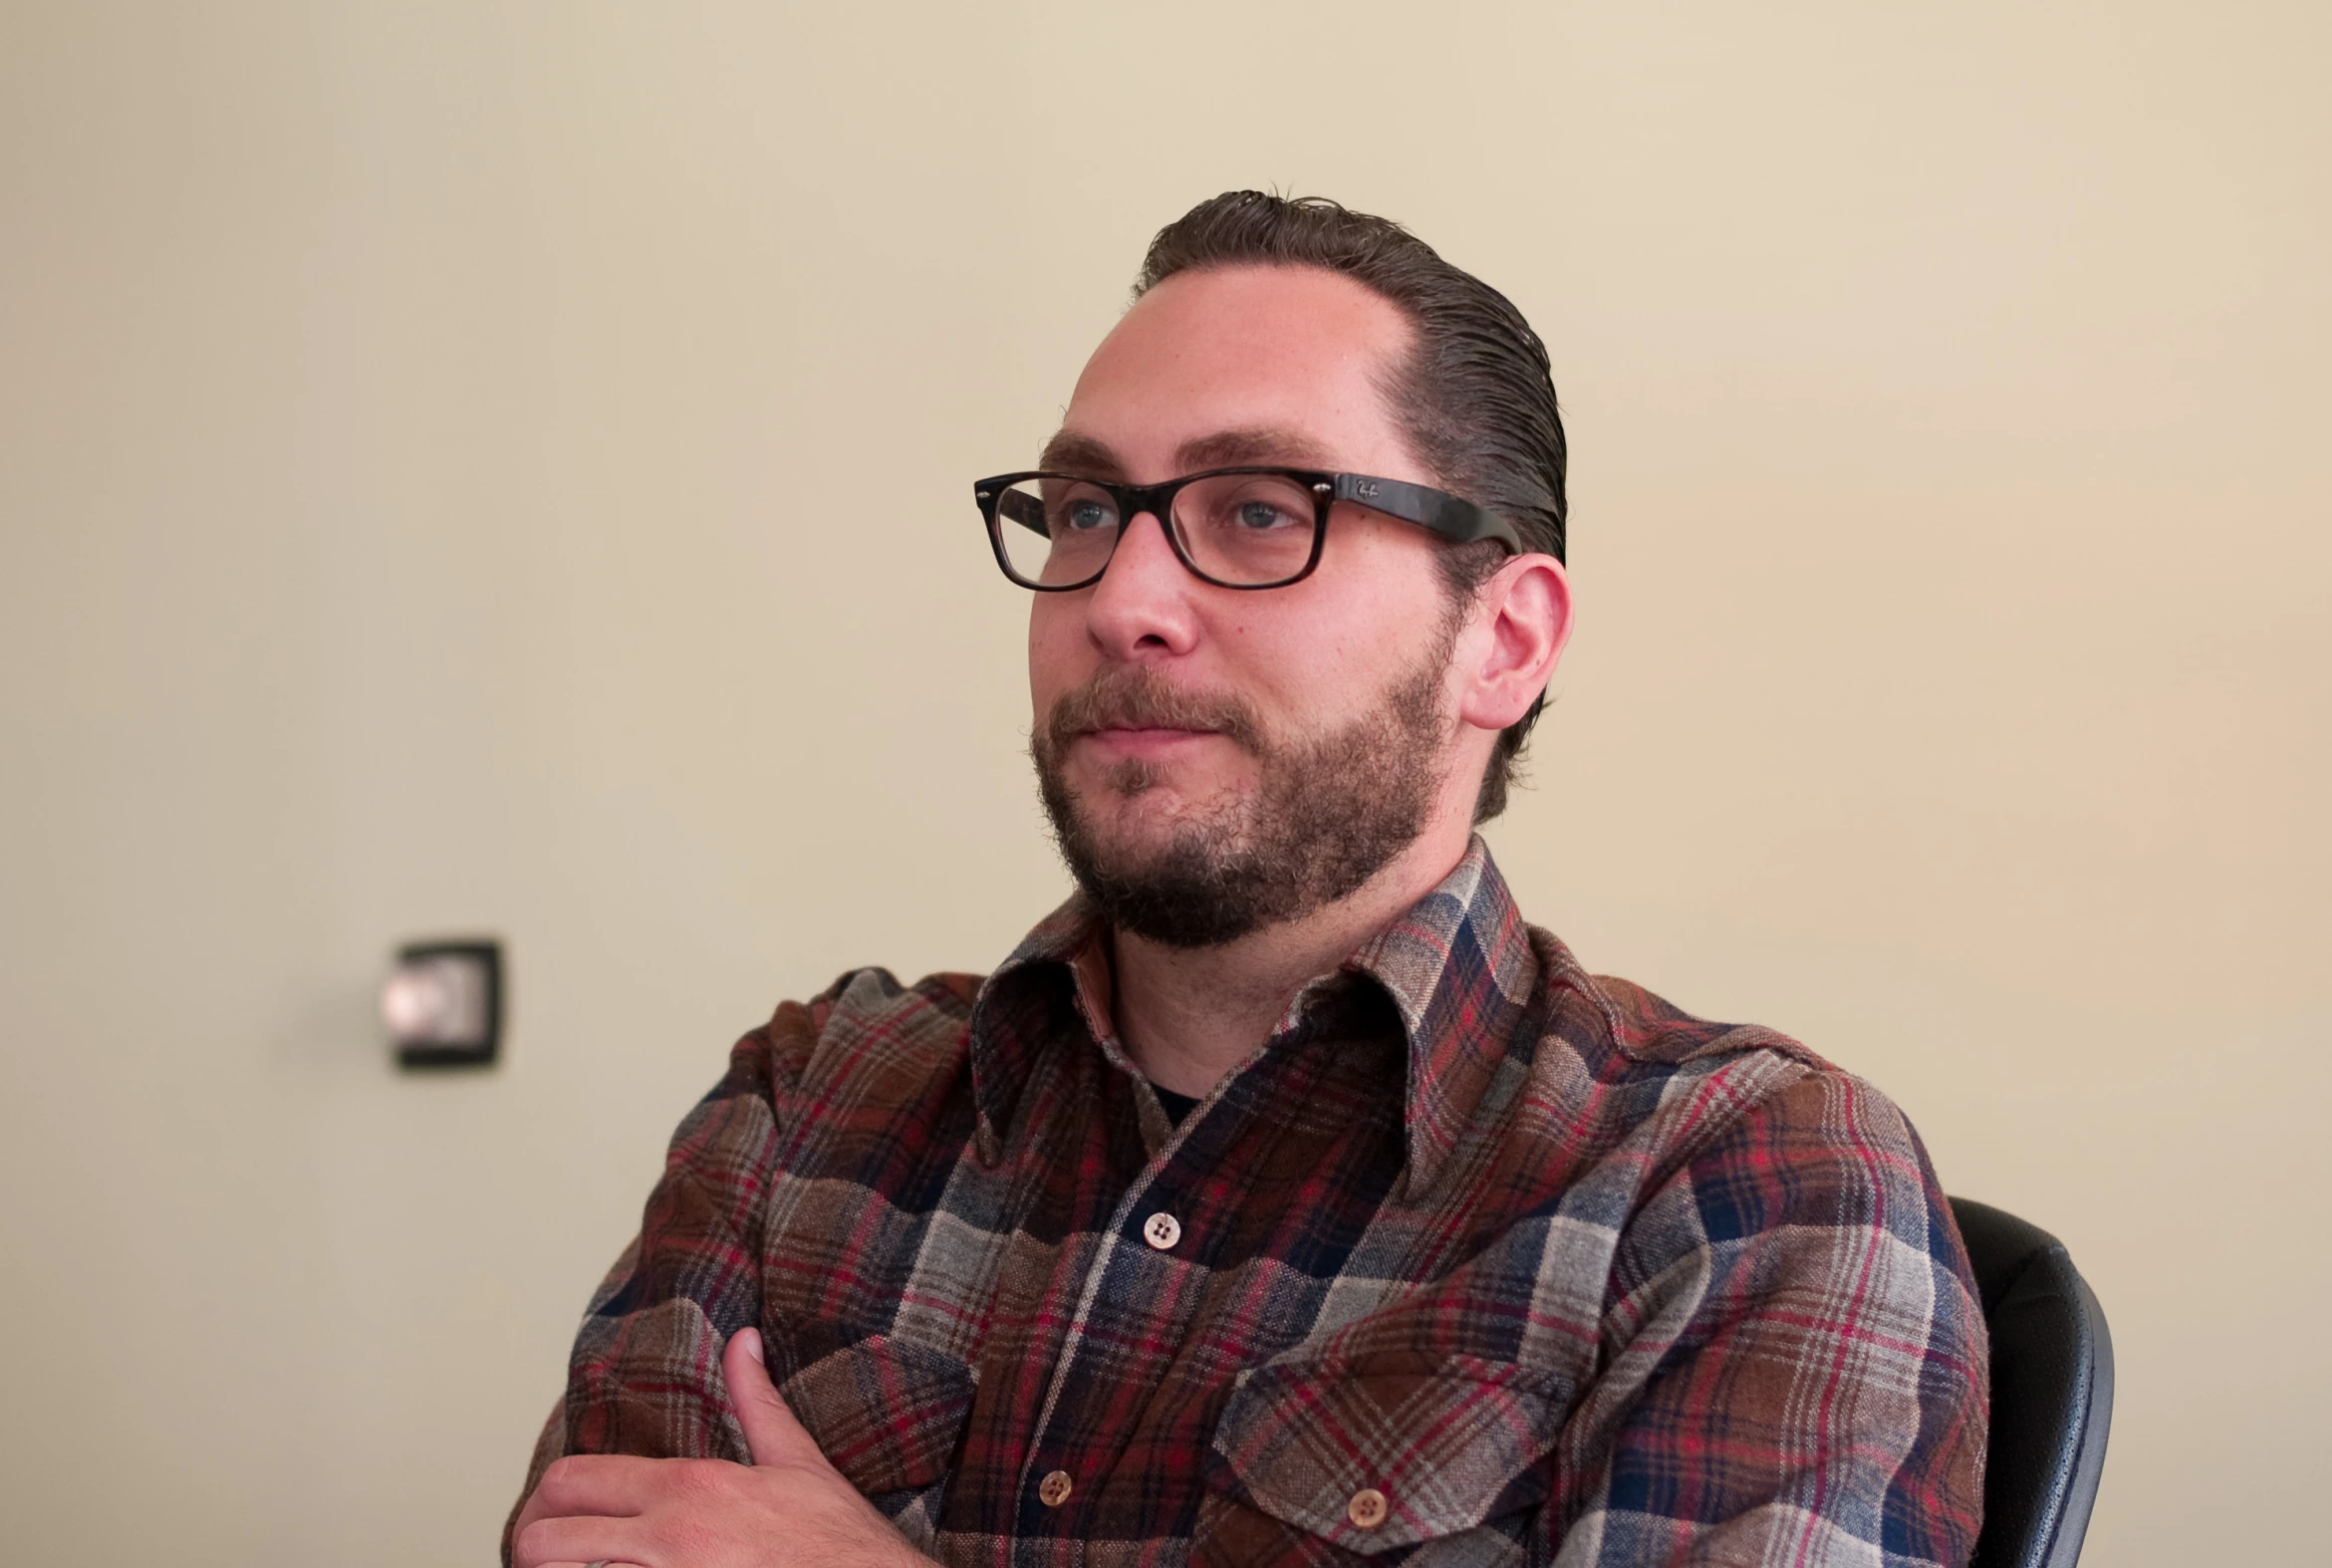 a man with glasses is wearing a plaid shirt and looking away from the camera